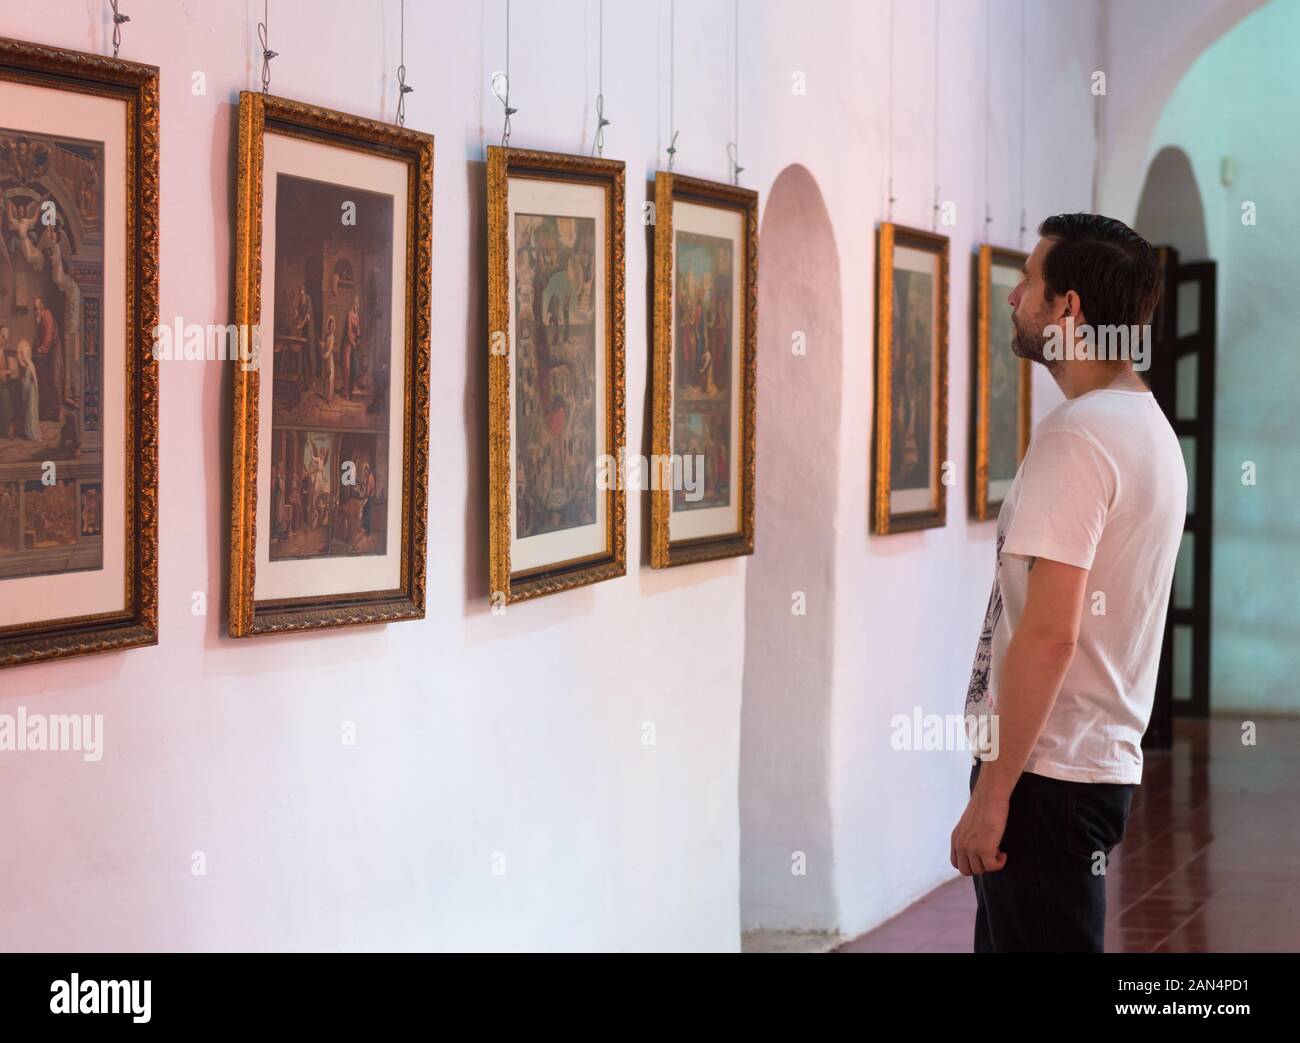 Visitor at the Sacred art museum in Conkal, Yucatan, Mexico Stock Photo